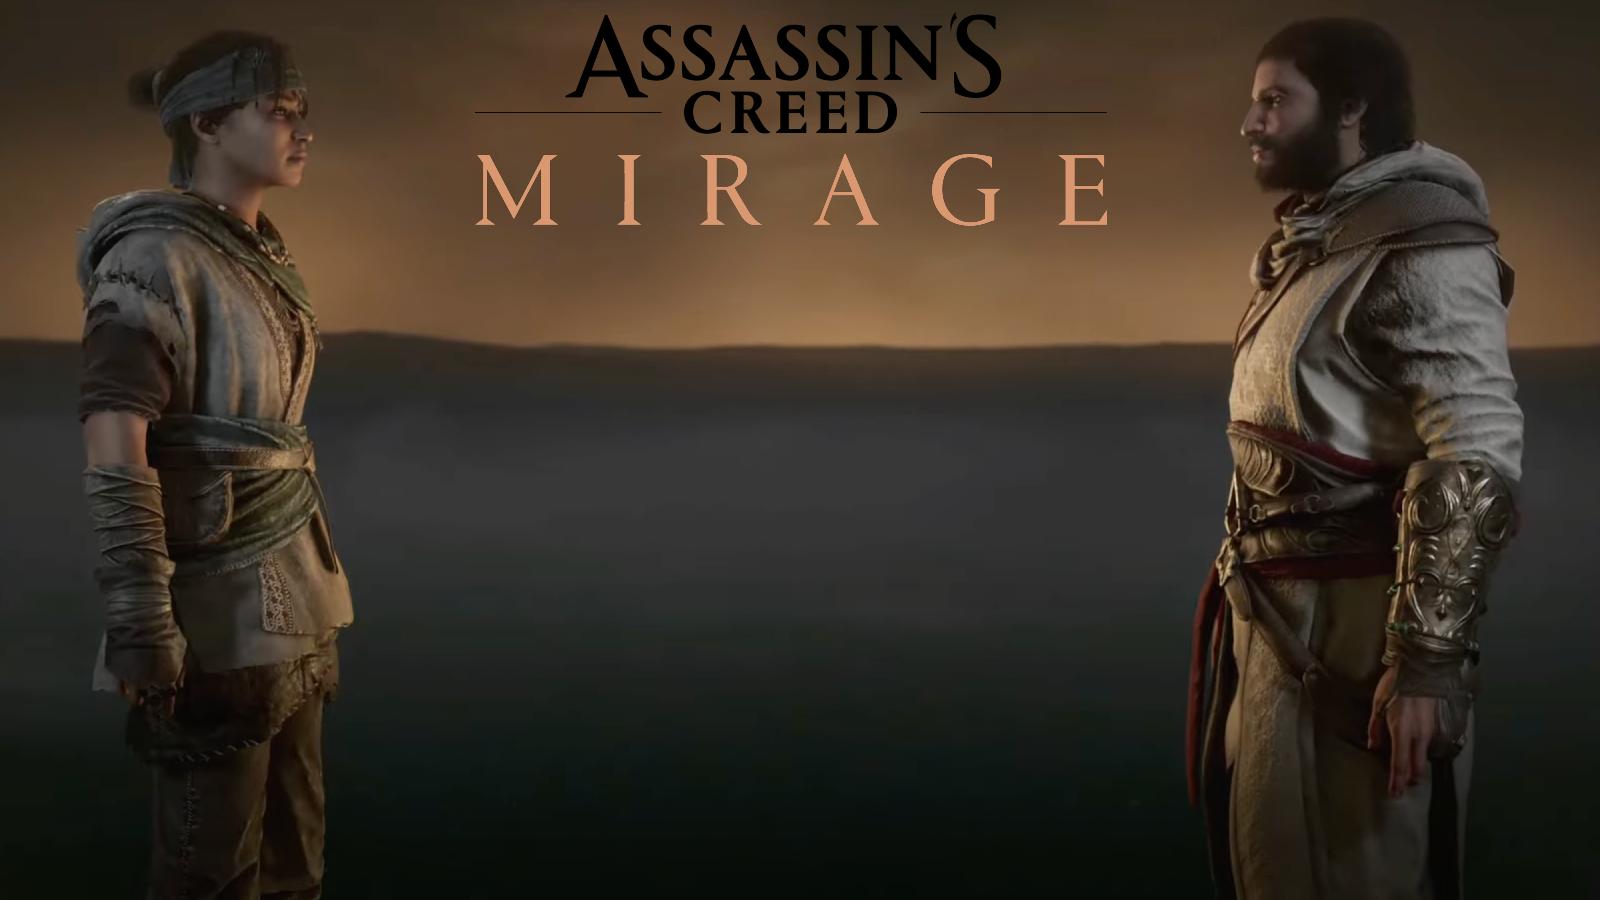 Mirage - Hi everyone!! Another day another new game at